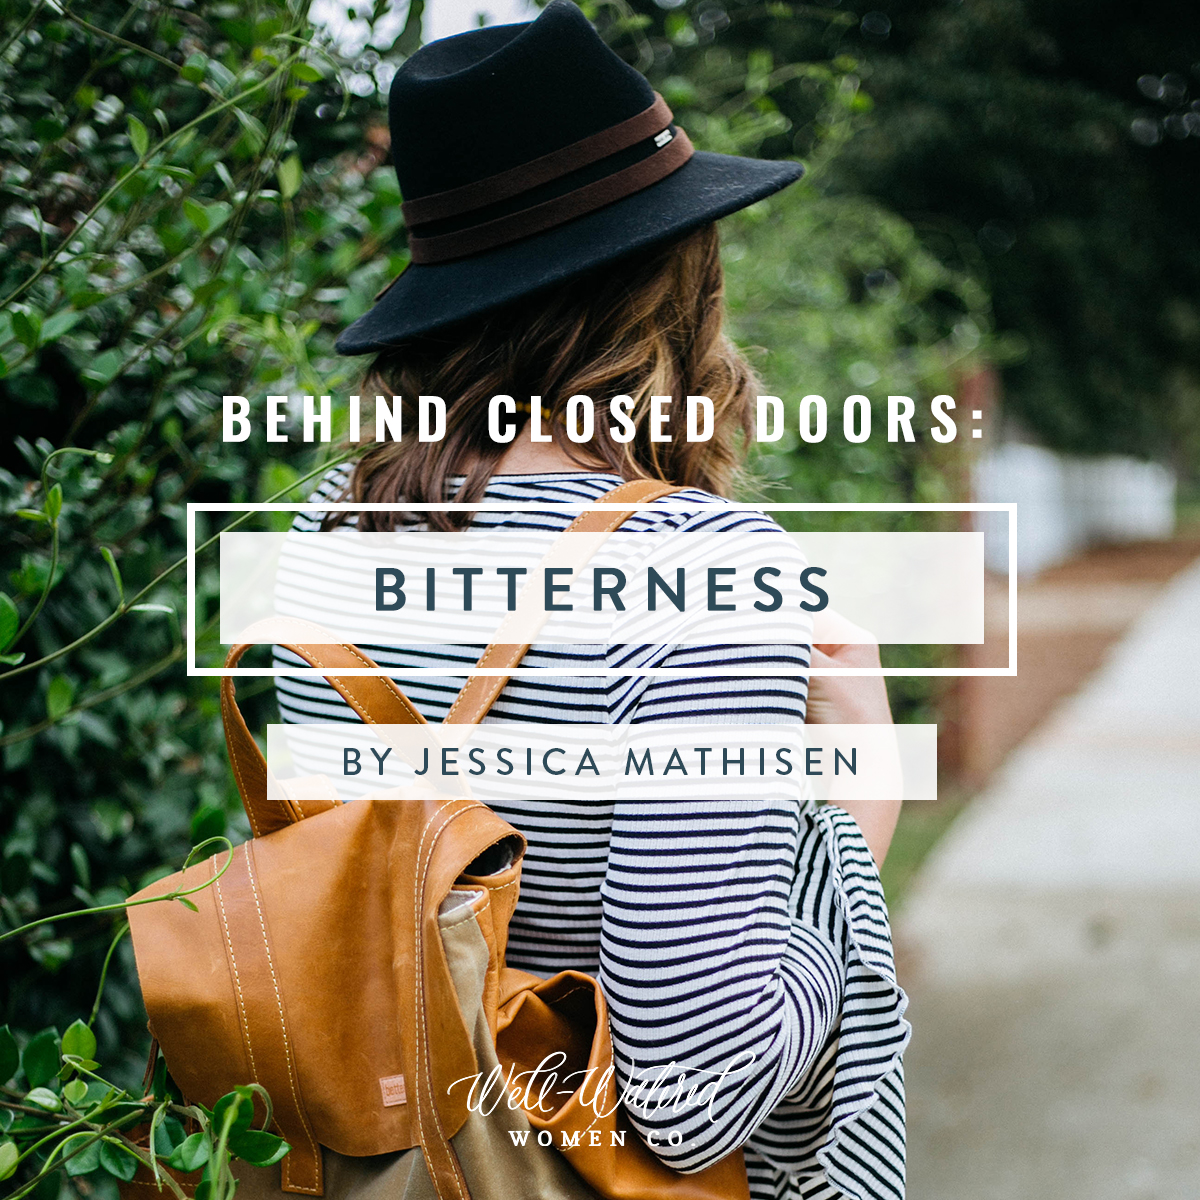 Behind Closed Doors-Bitterness-Well-Watered Women | If we are in Christ, we have been given everything we need to live a life that glorifies and honors Him. While it feels easier to stay in our pity party, a life marked by bitterness is one devoid of joy. We cannot walk in freedom with Christ when we stay chained to feelings that enable an entitled and bitter spirit.